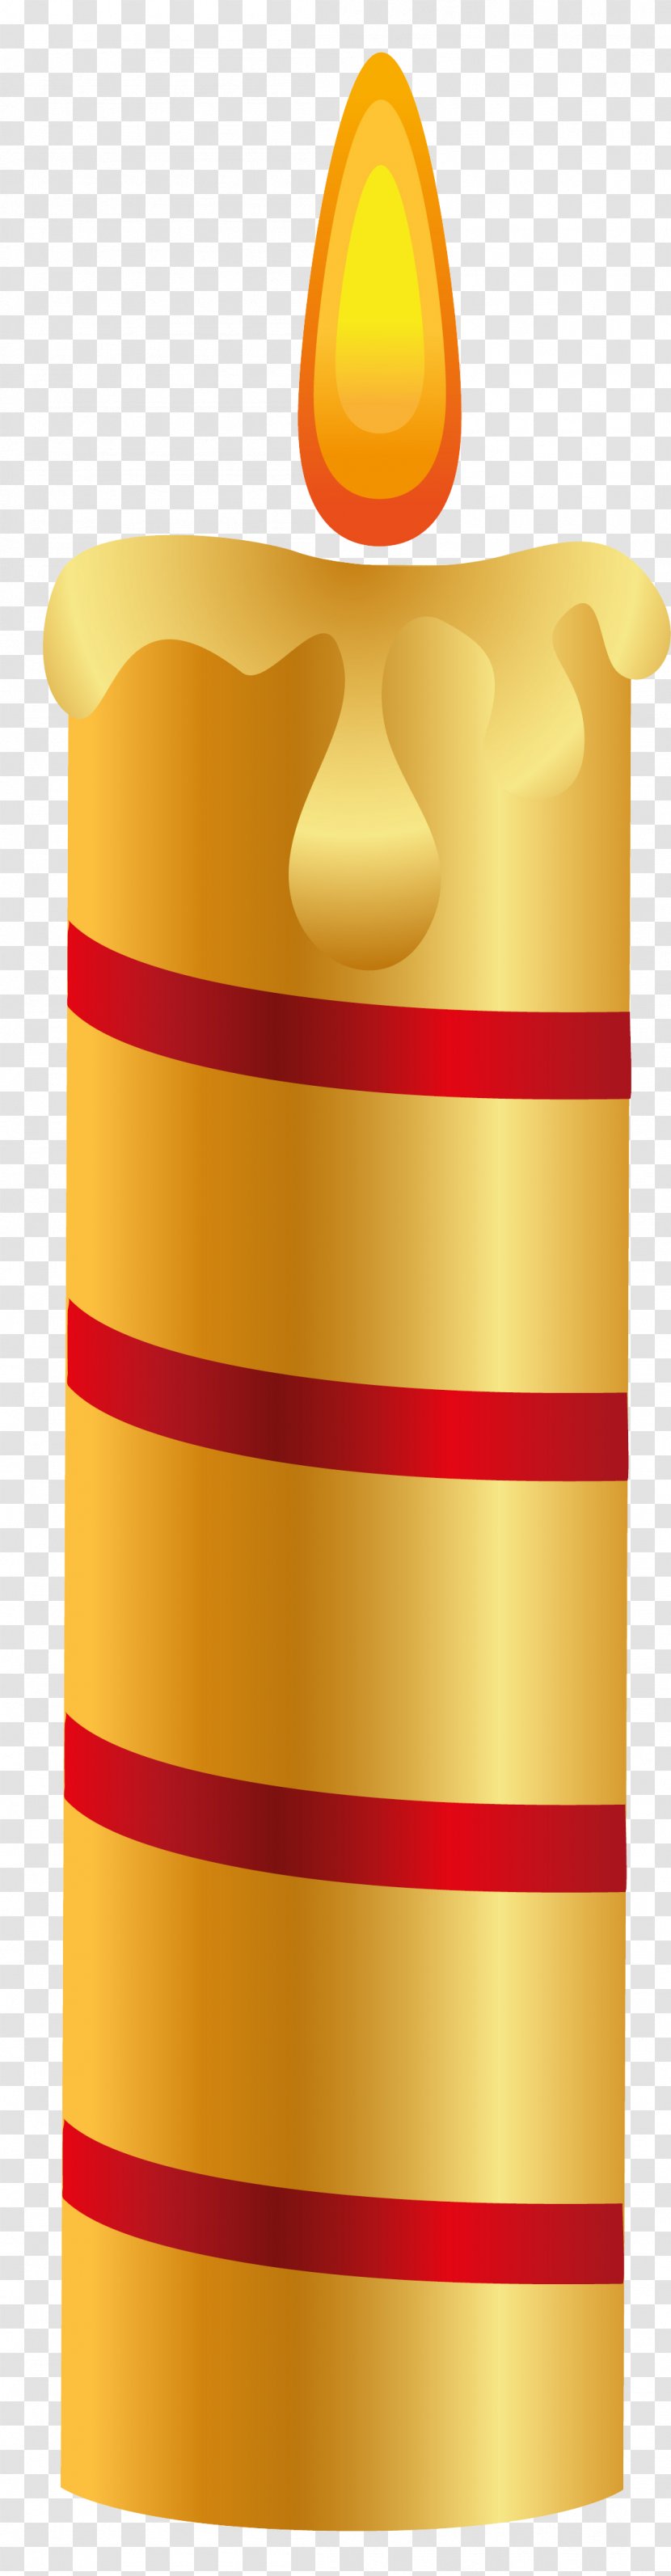 Candle Design Yellow Flame Image Transparent PNG